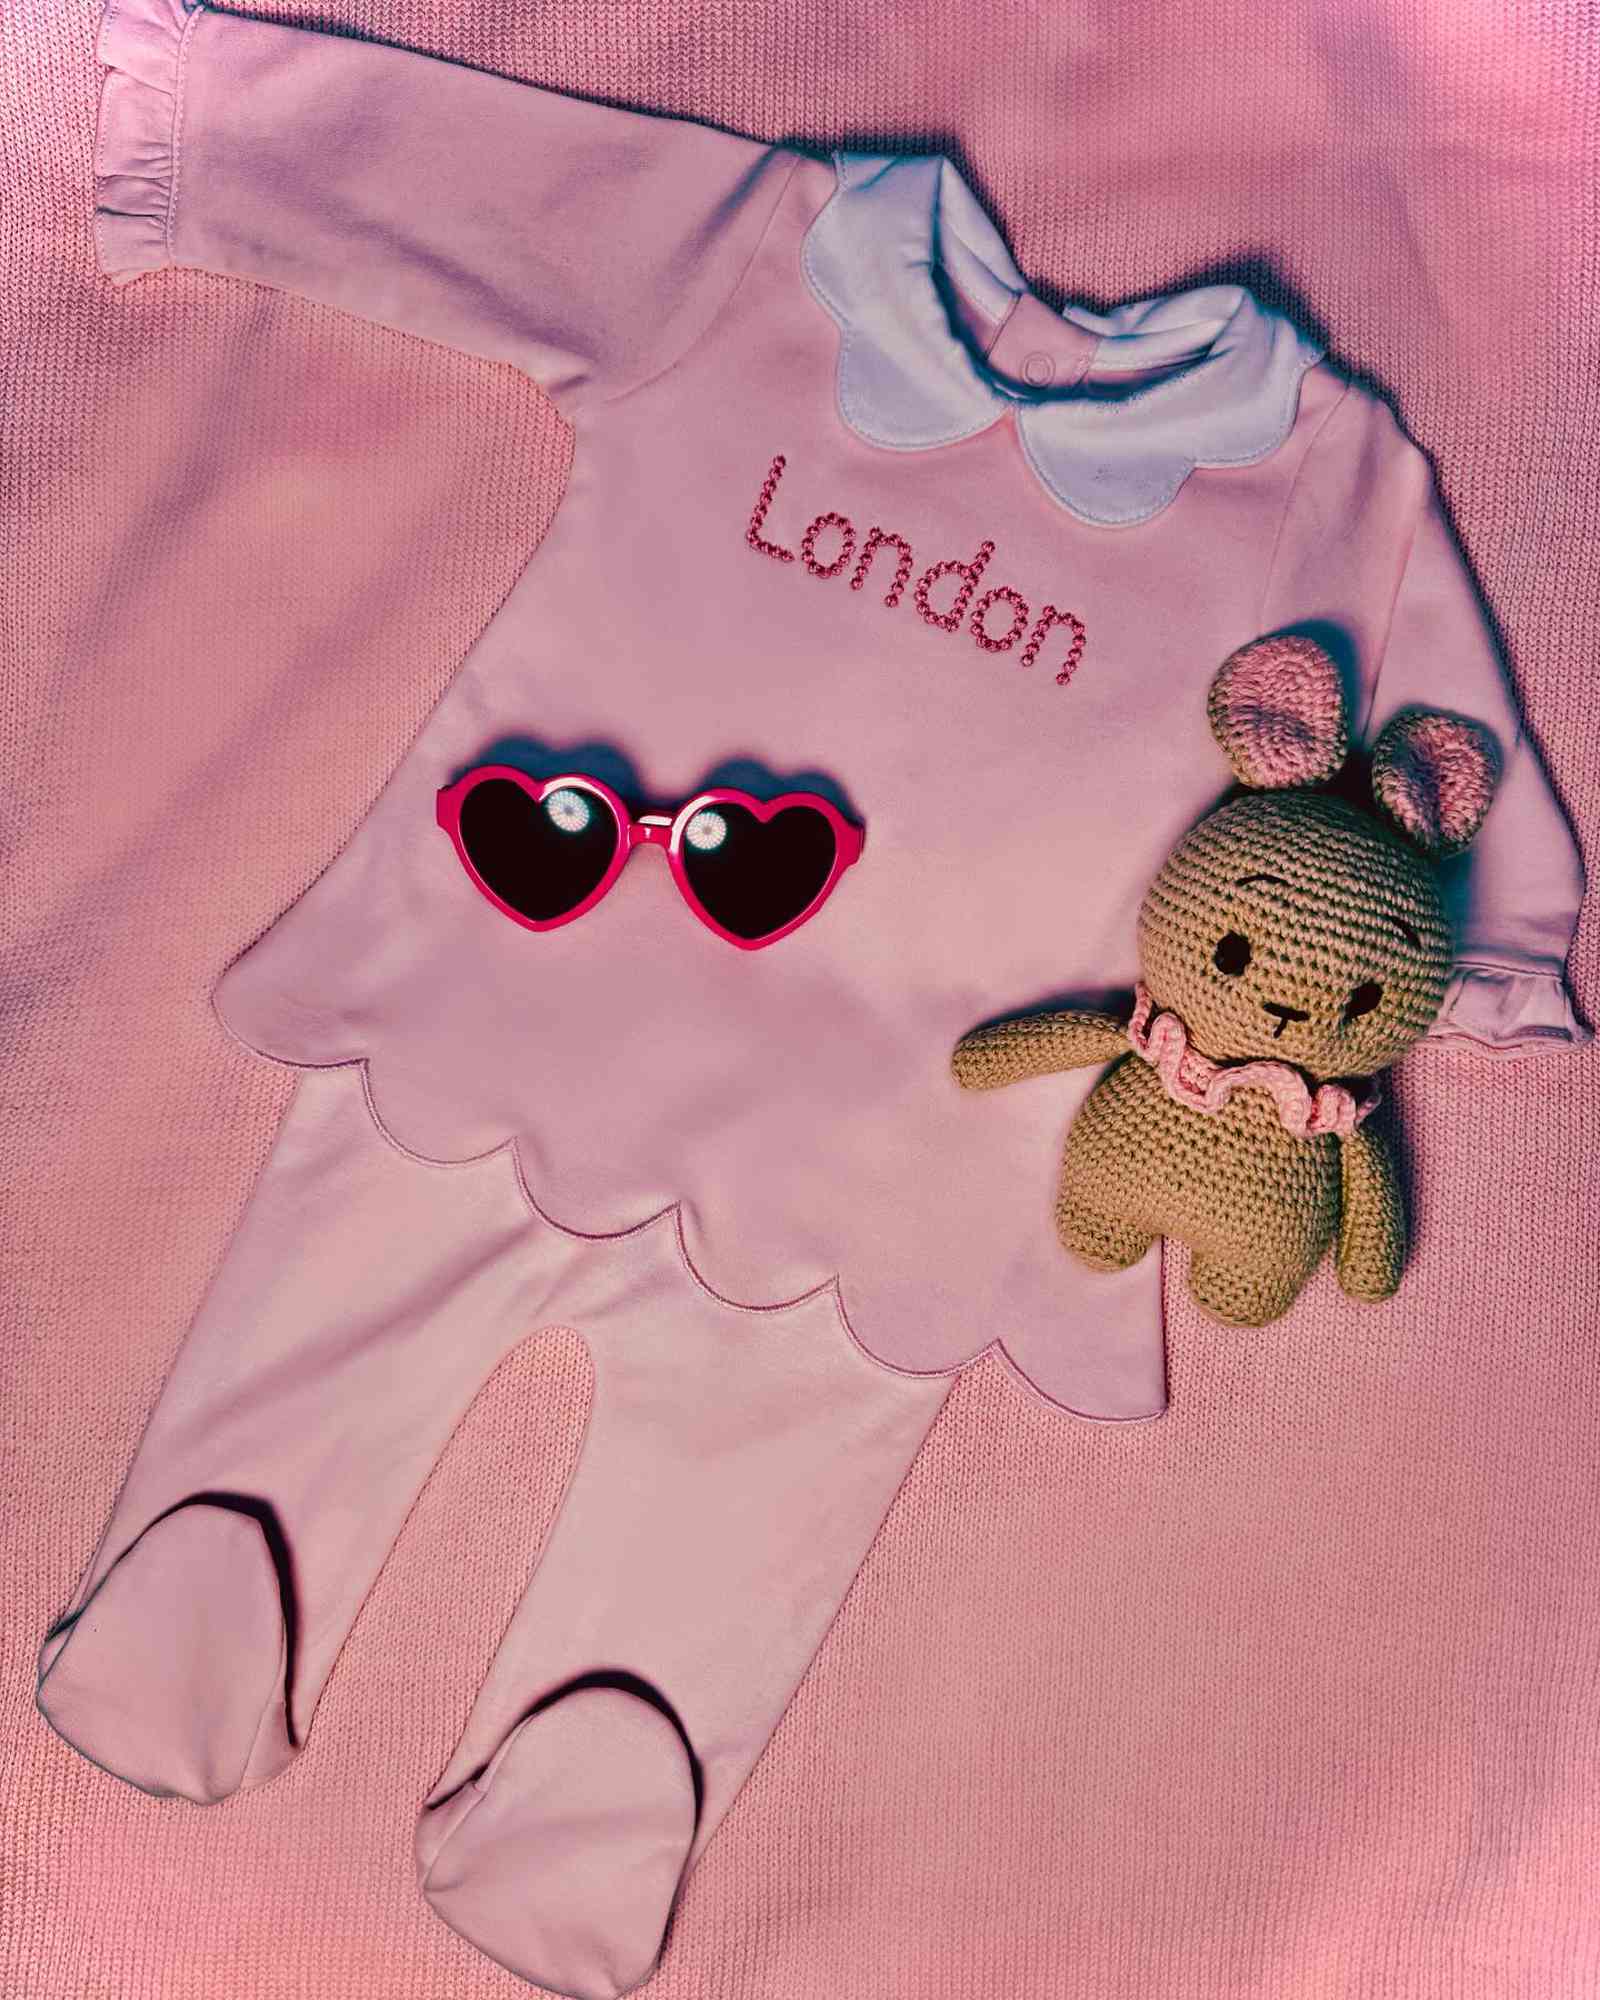 Paris Hilton welcomes her baby daughter London on Instagram.